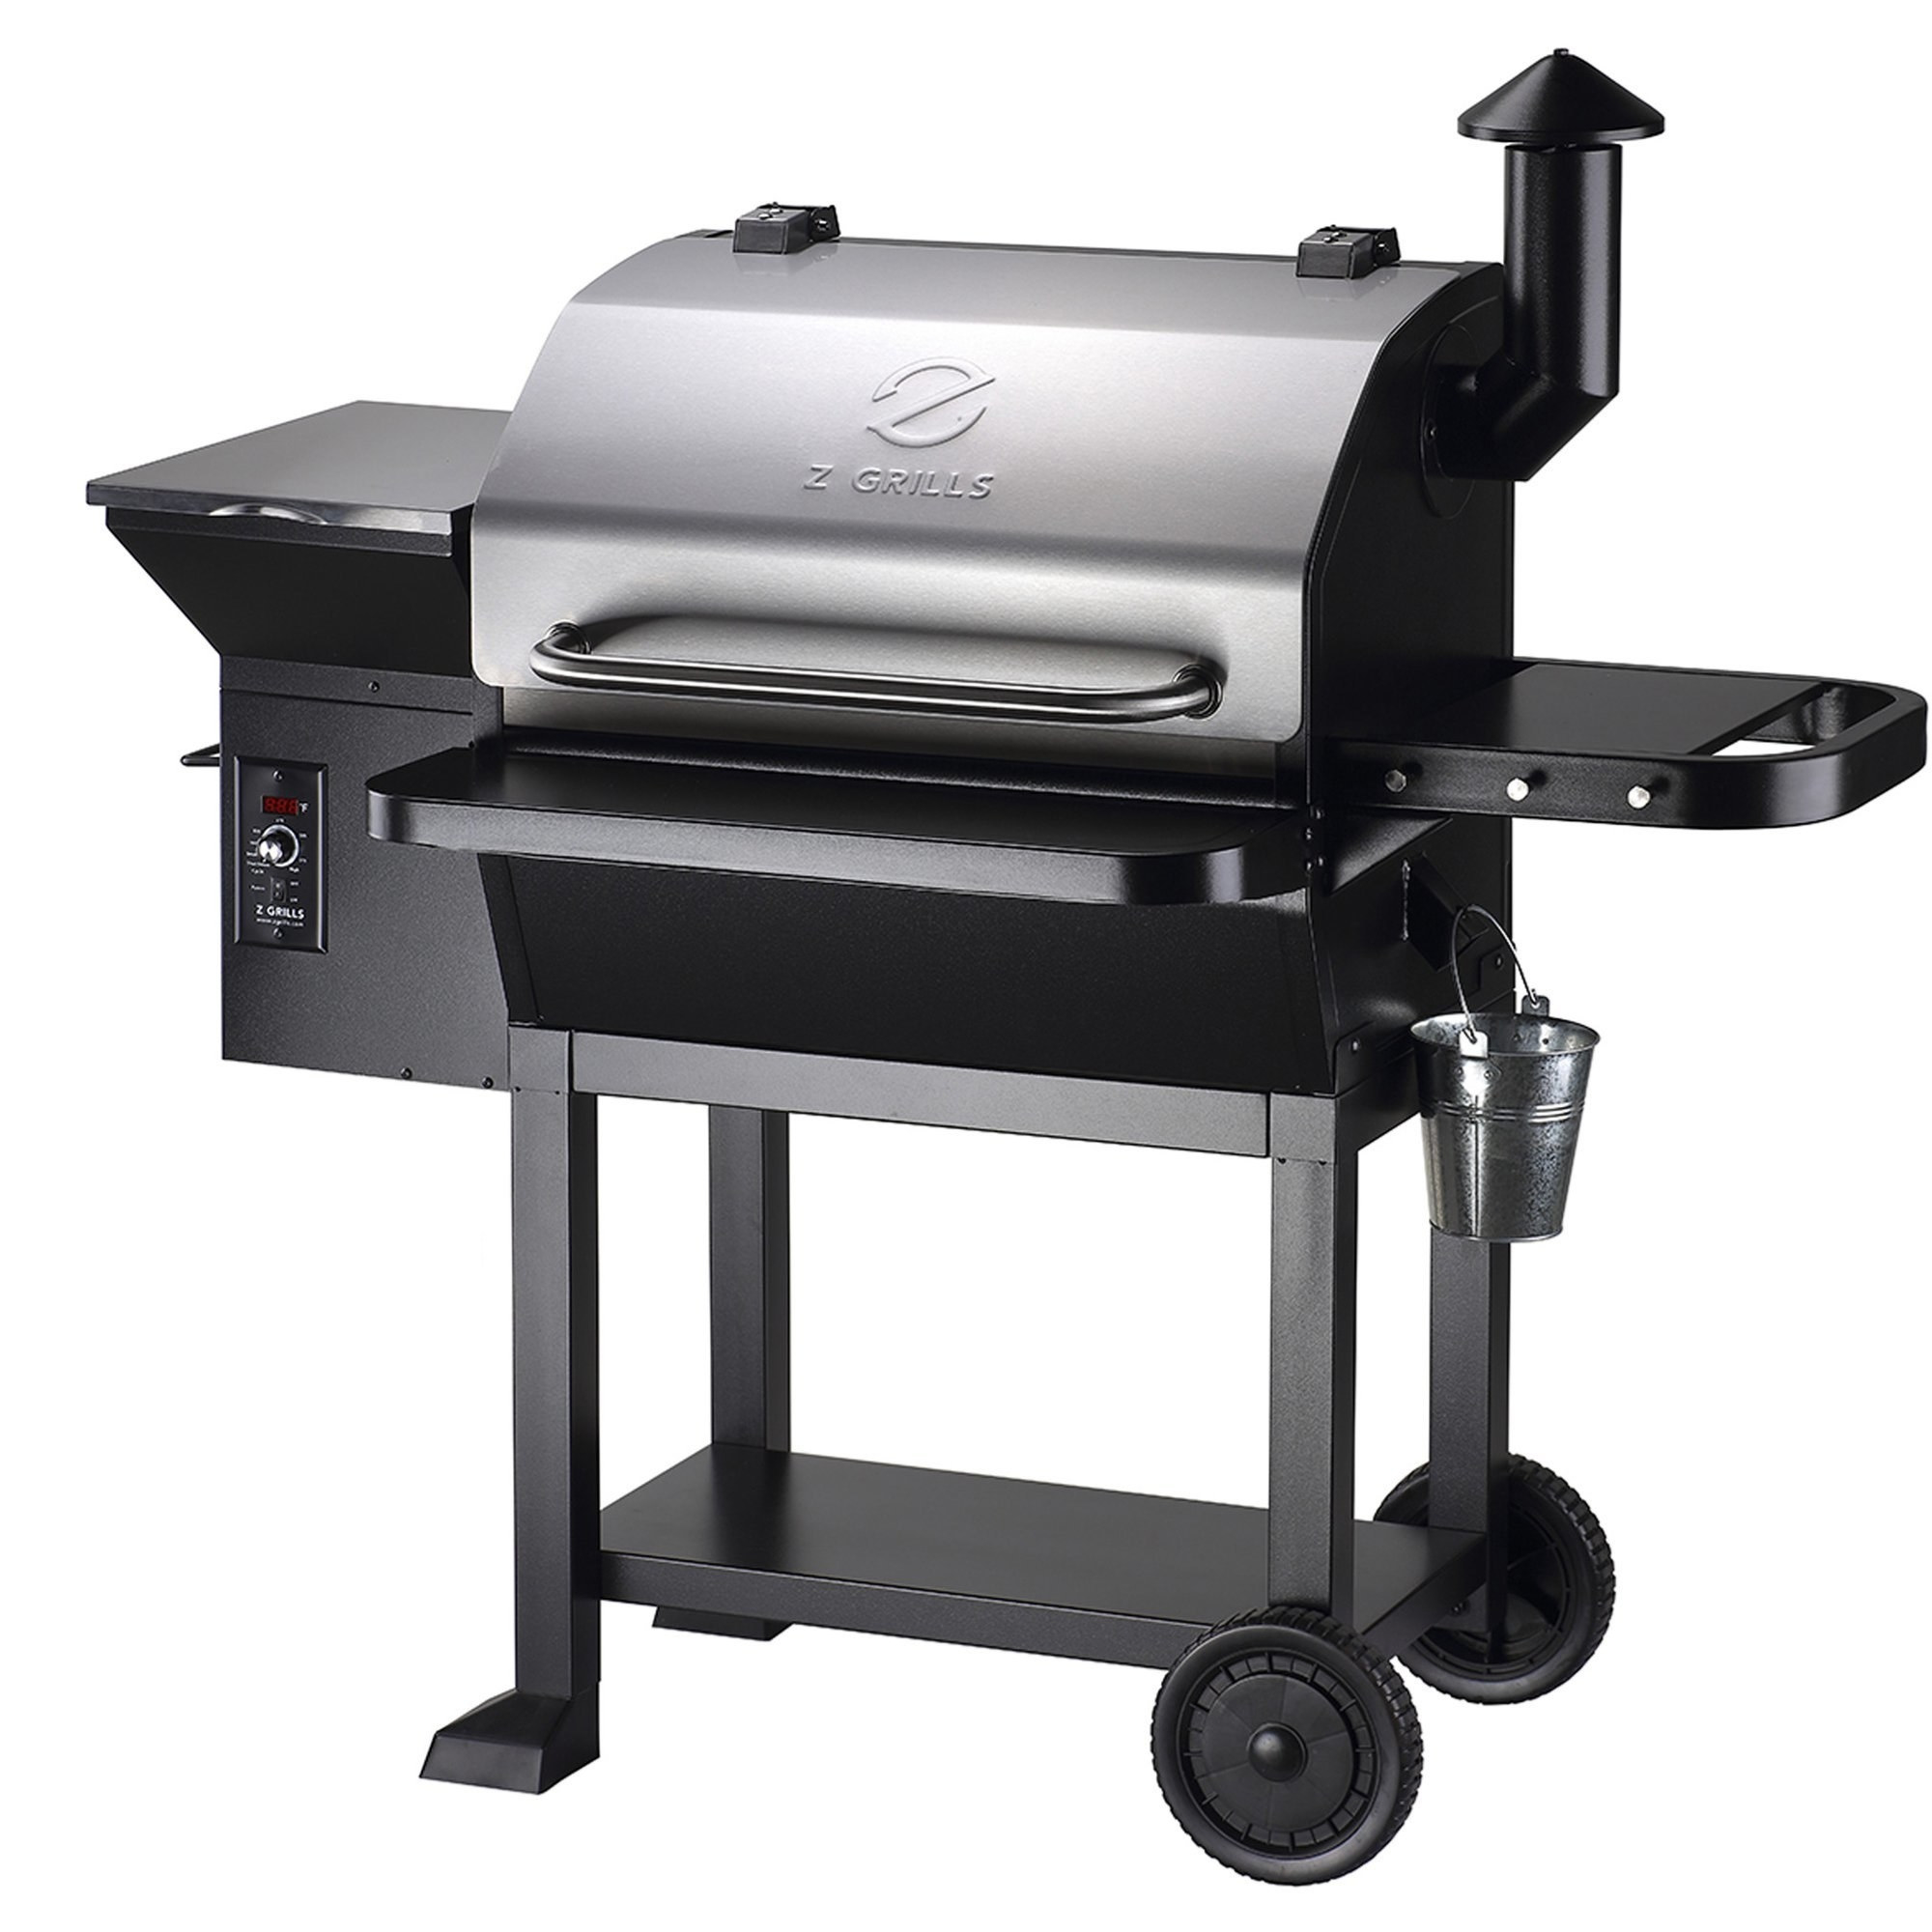 The chrome pellet grill and smoker